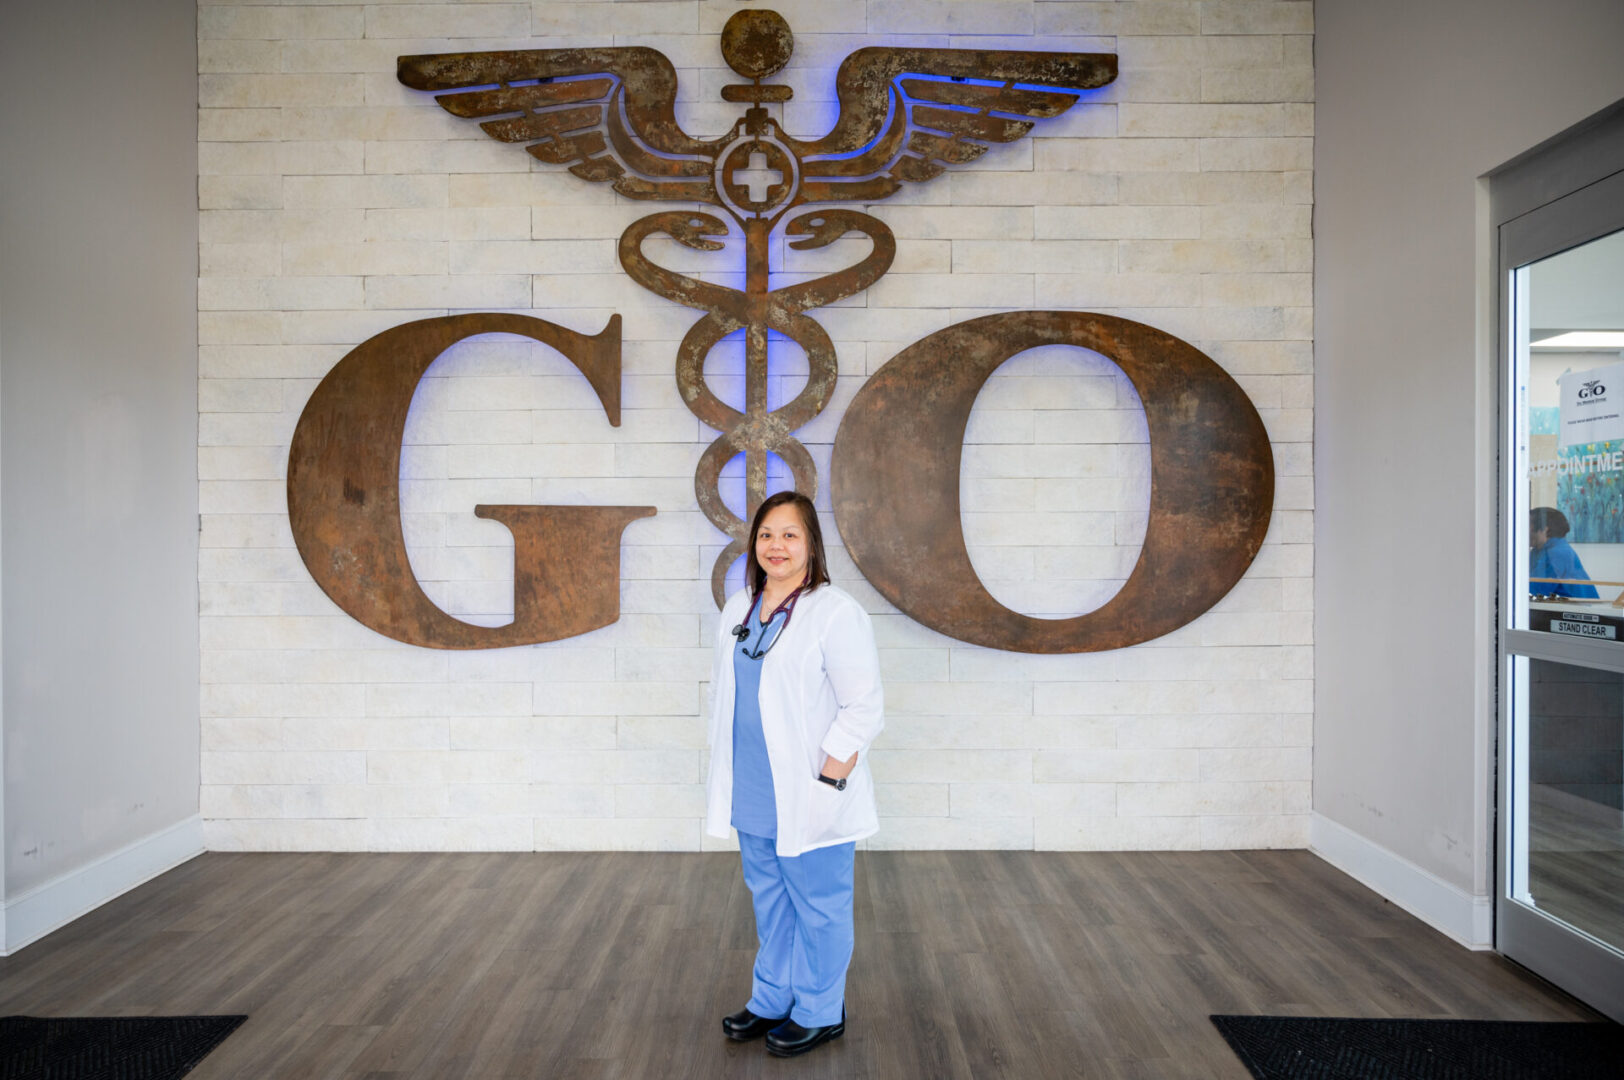 A woman in scrubs standing in front of a large sign.